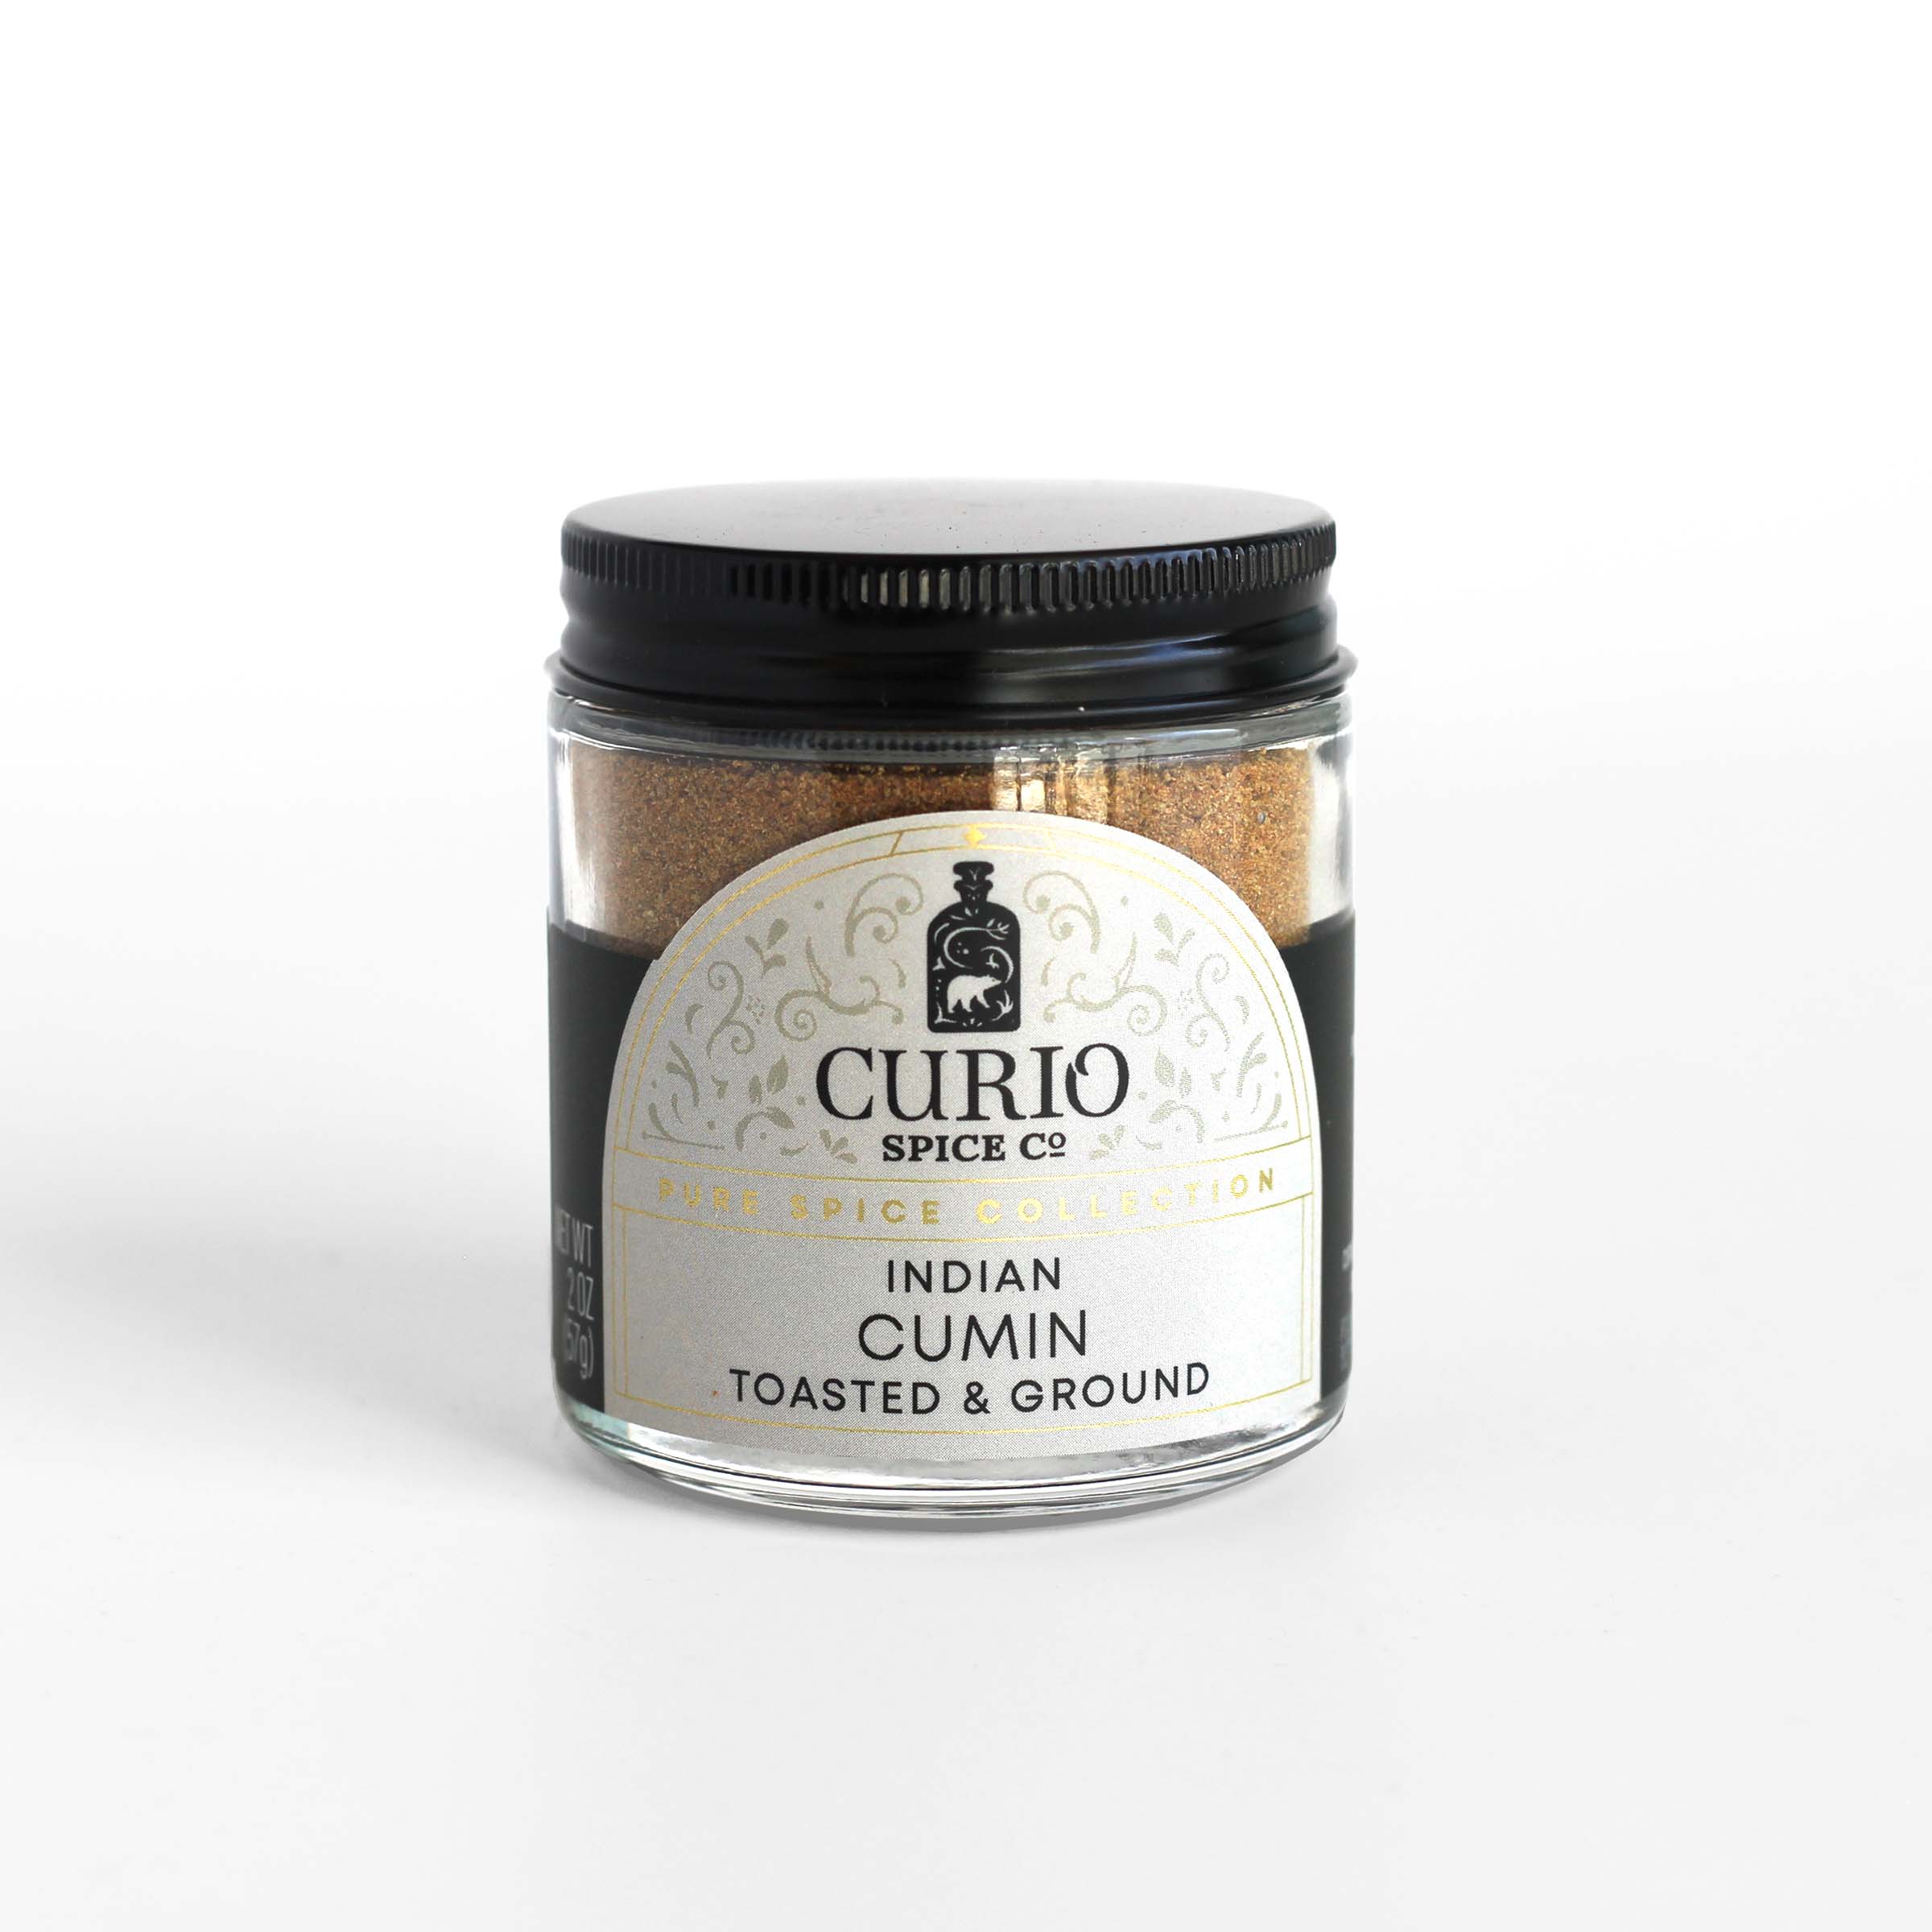 Curio Spice Co Indian Cumin, Toasted and Ground- Olive Oil Etcetera